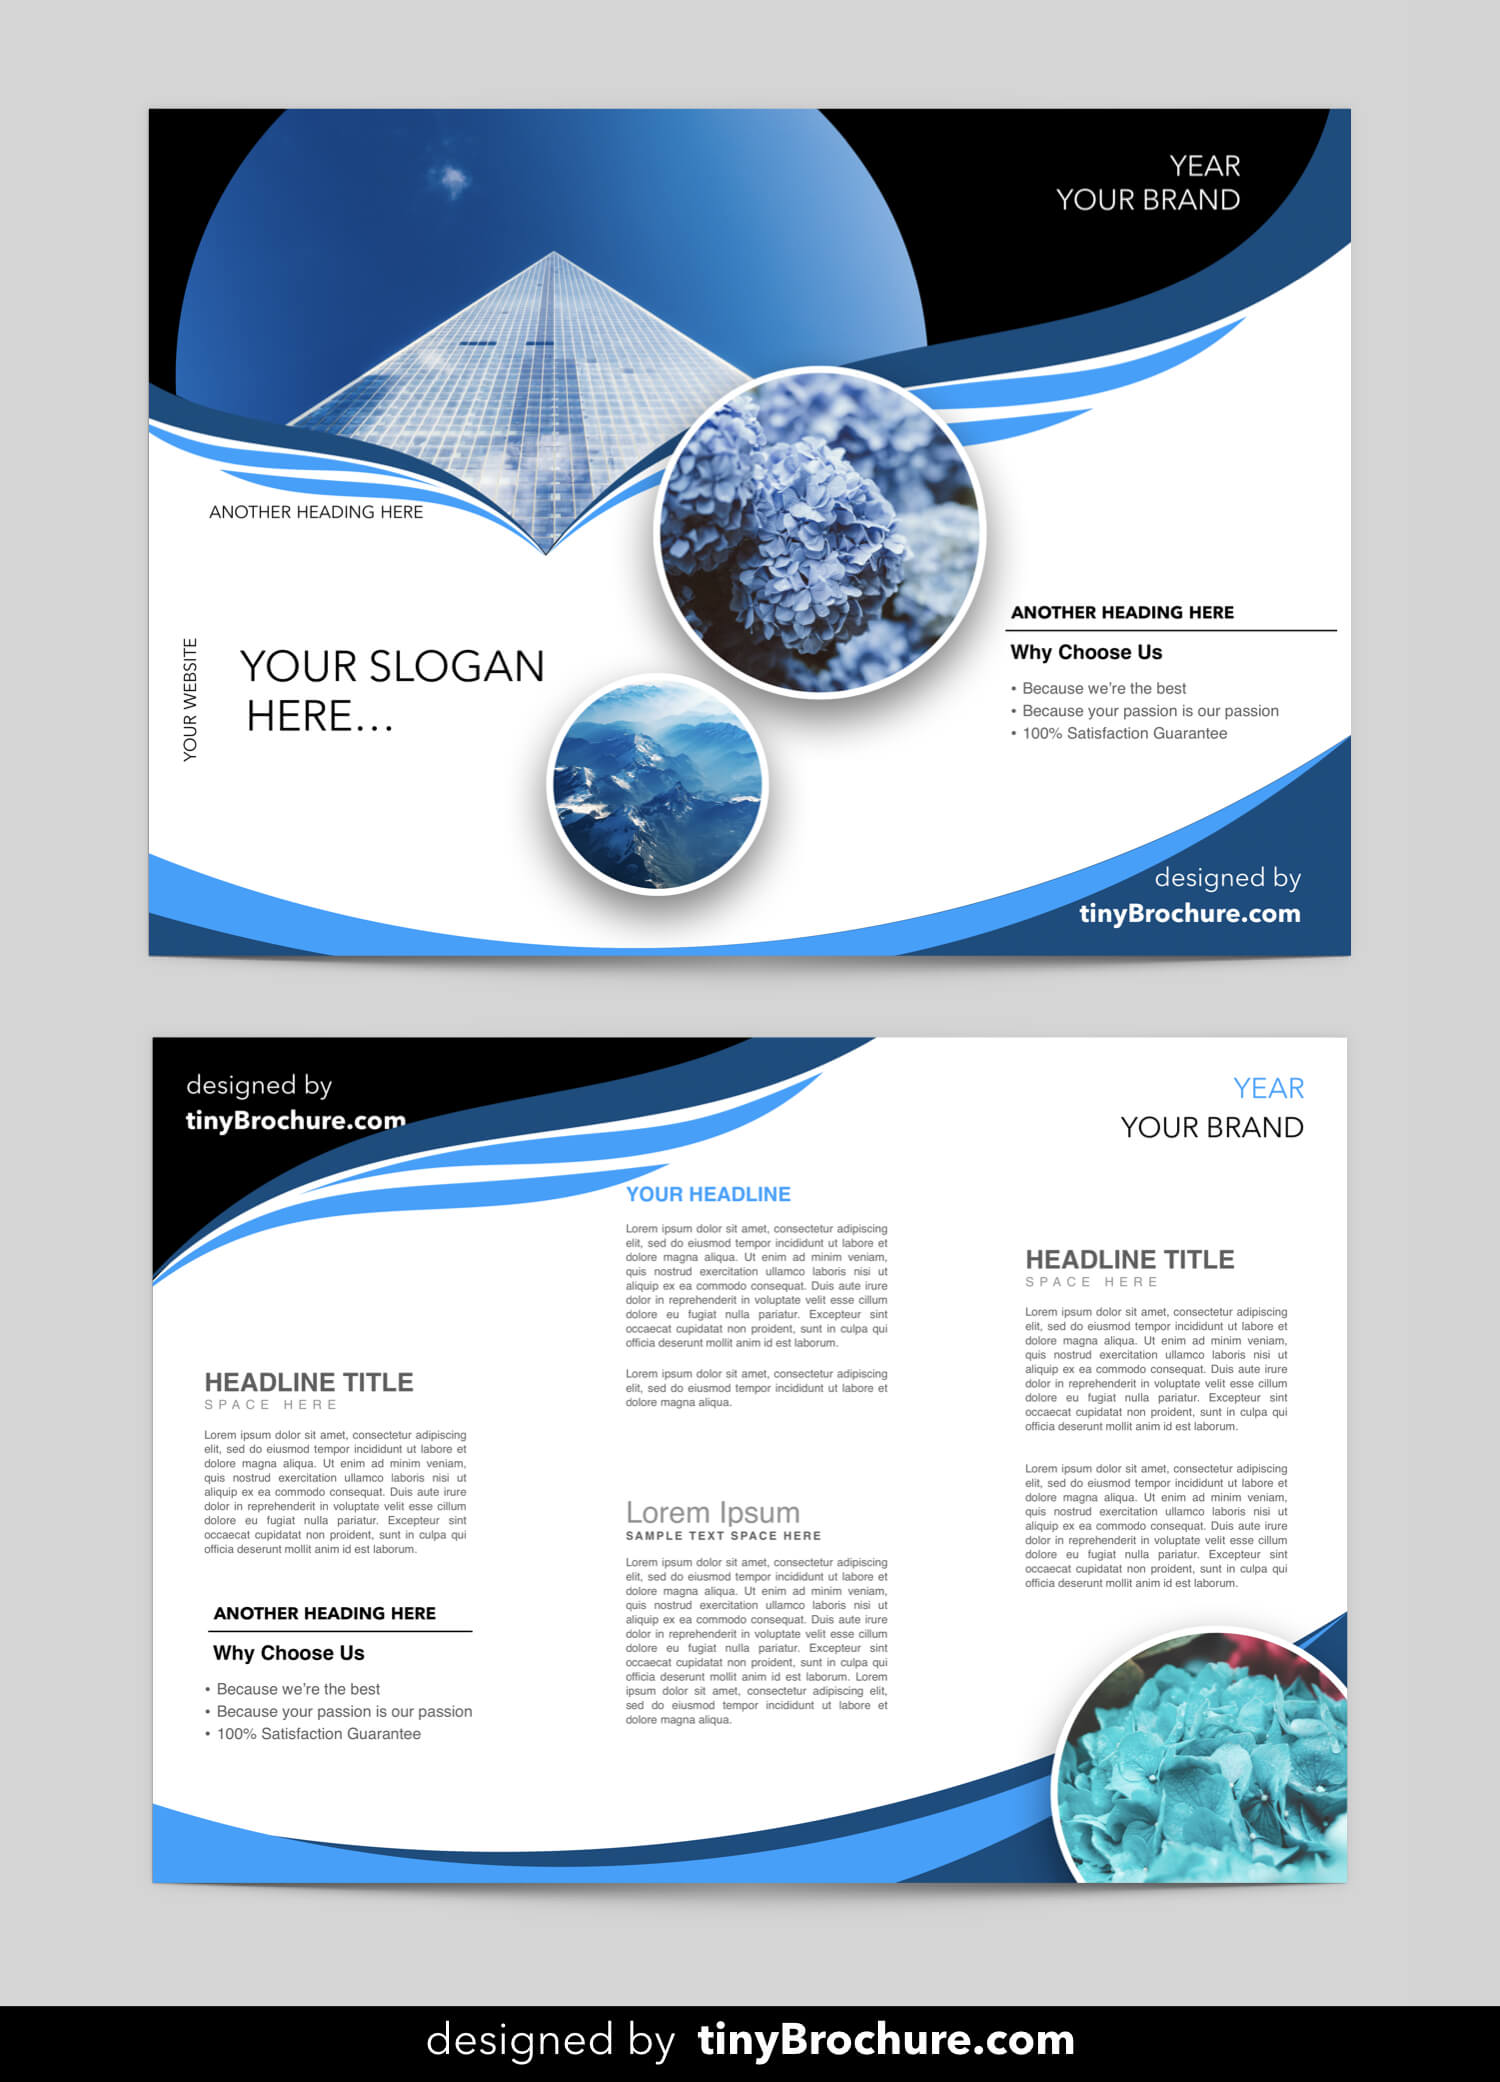 Editable Brochure Template Word Free Download | Word With Regard To Adobe Illustrator Brochure Templates Free Download